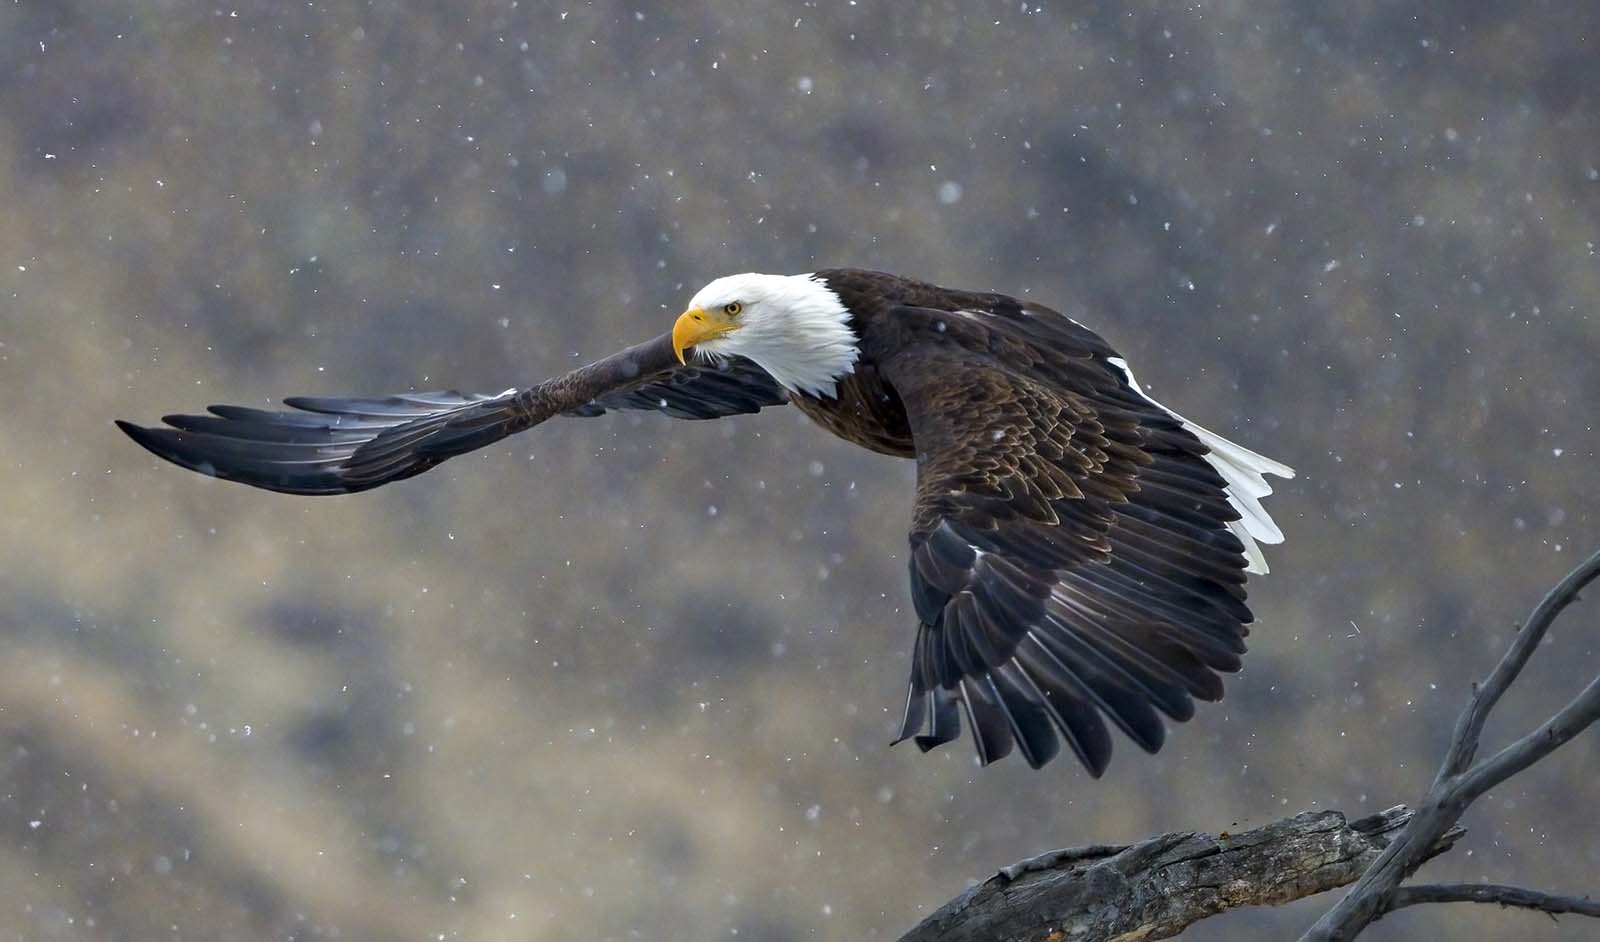 Bald eagle in flight, with snow flakes in the air. Photo by Rob Koelling.